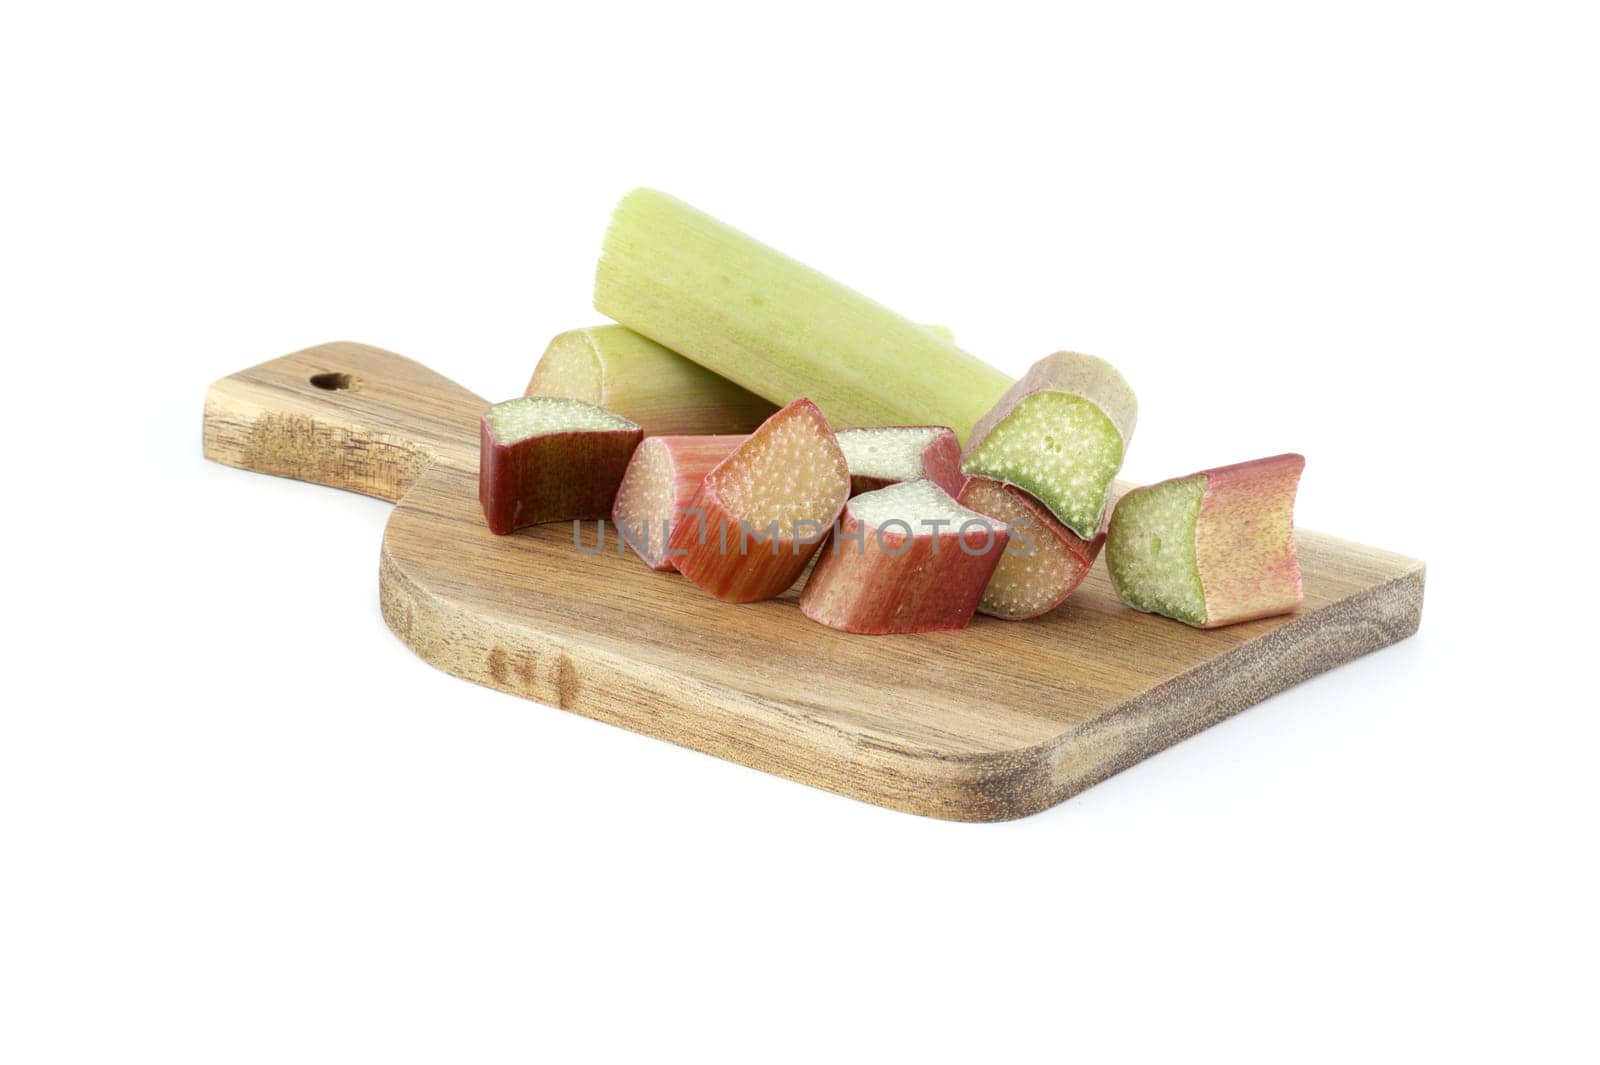 Variety of rhubarb stalks of varying colors from pale green to deep red on wooden cutting board isolated on white background